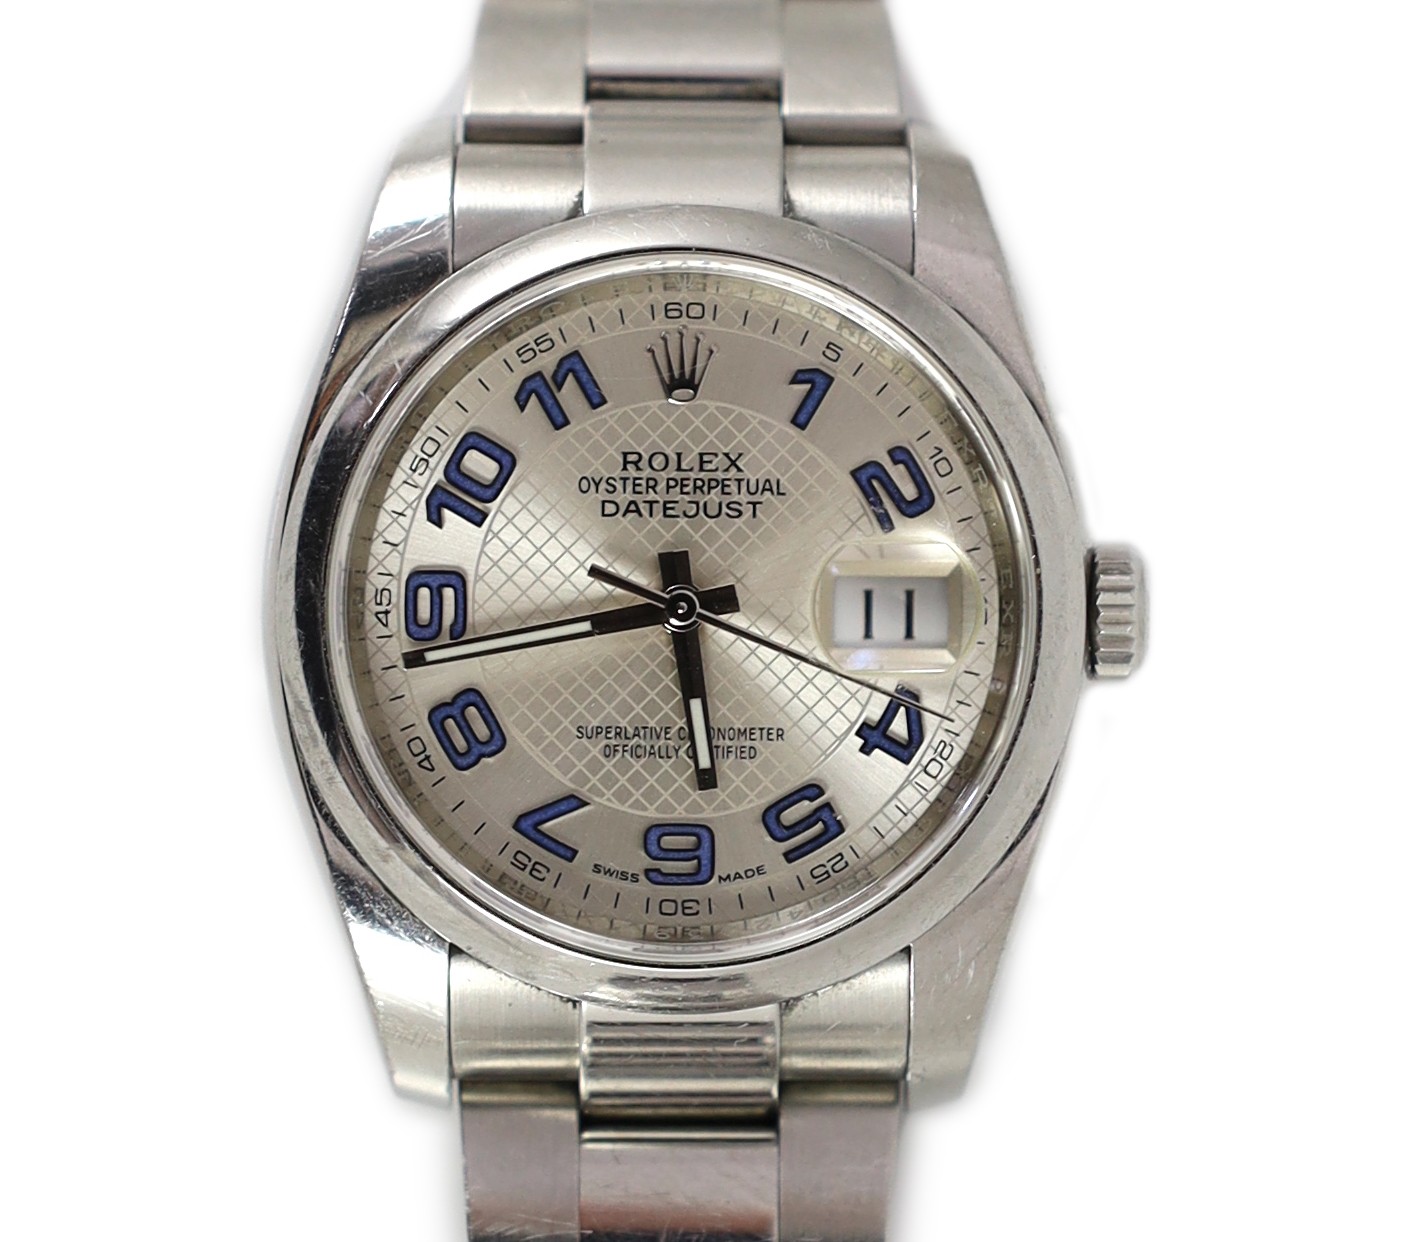 A gentleman's early 21st century stainless steel Rolex Oyster Perpetual Datejust wrist watch